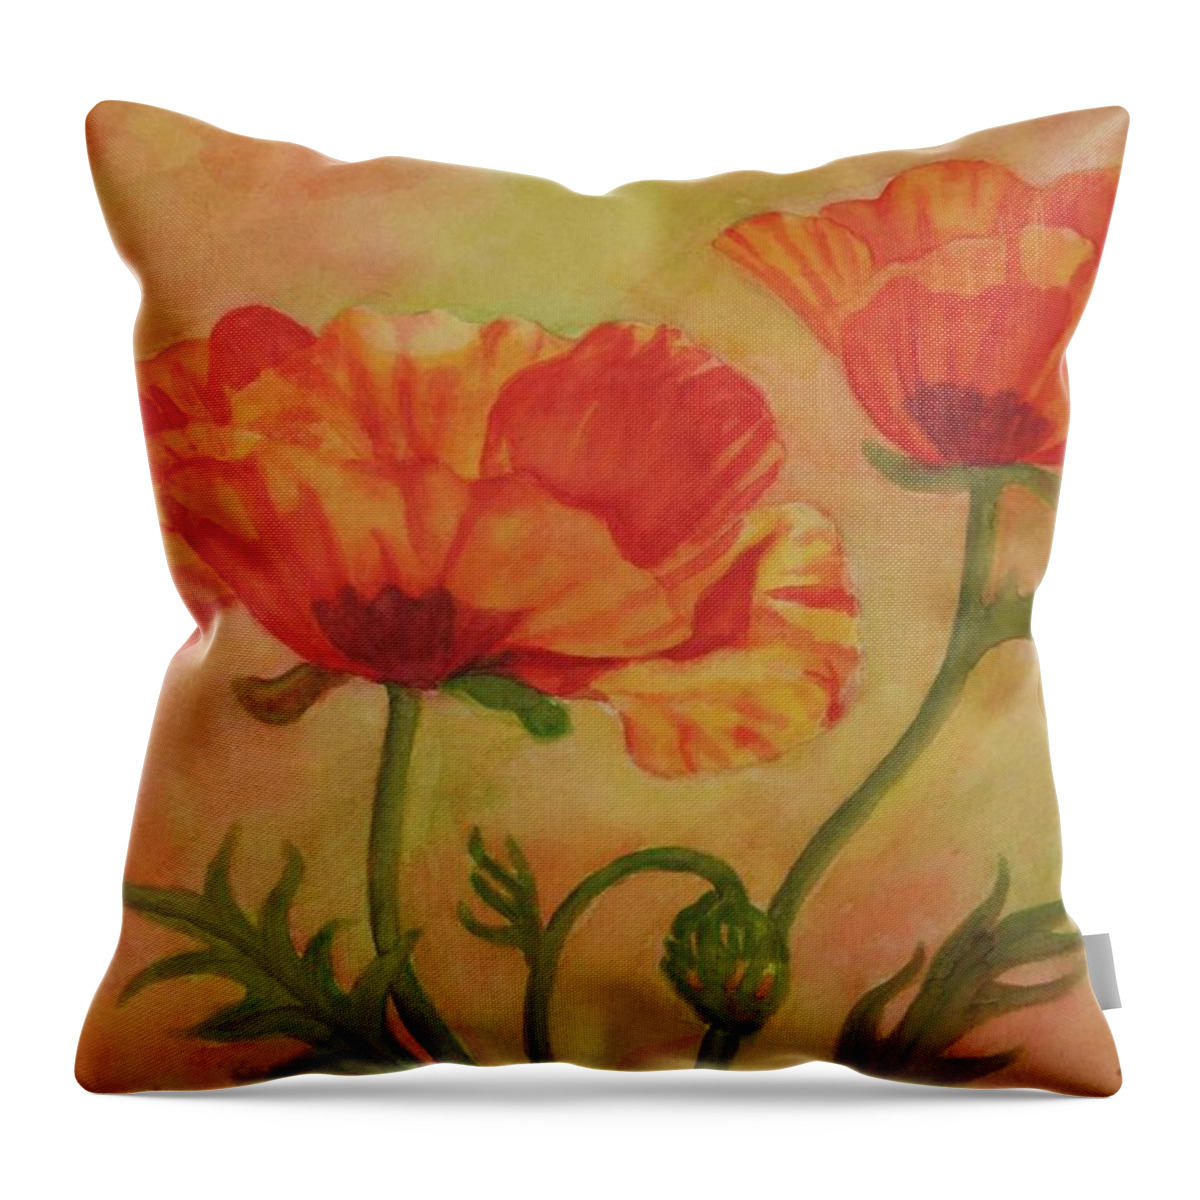 Floral Throw Pillow featuring the painting Poppies by Heidi E Nelson